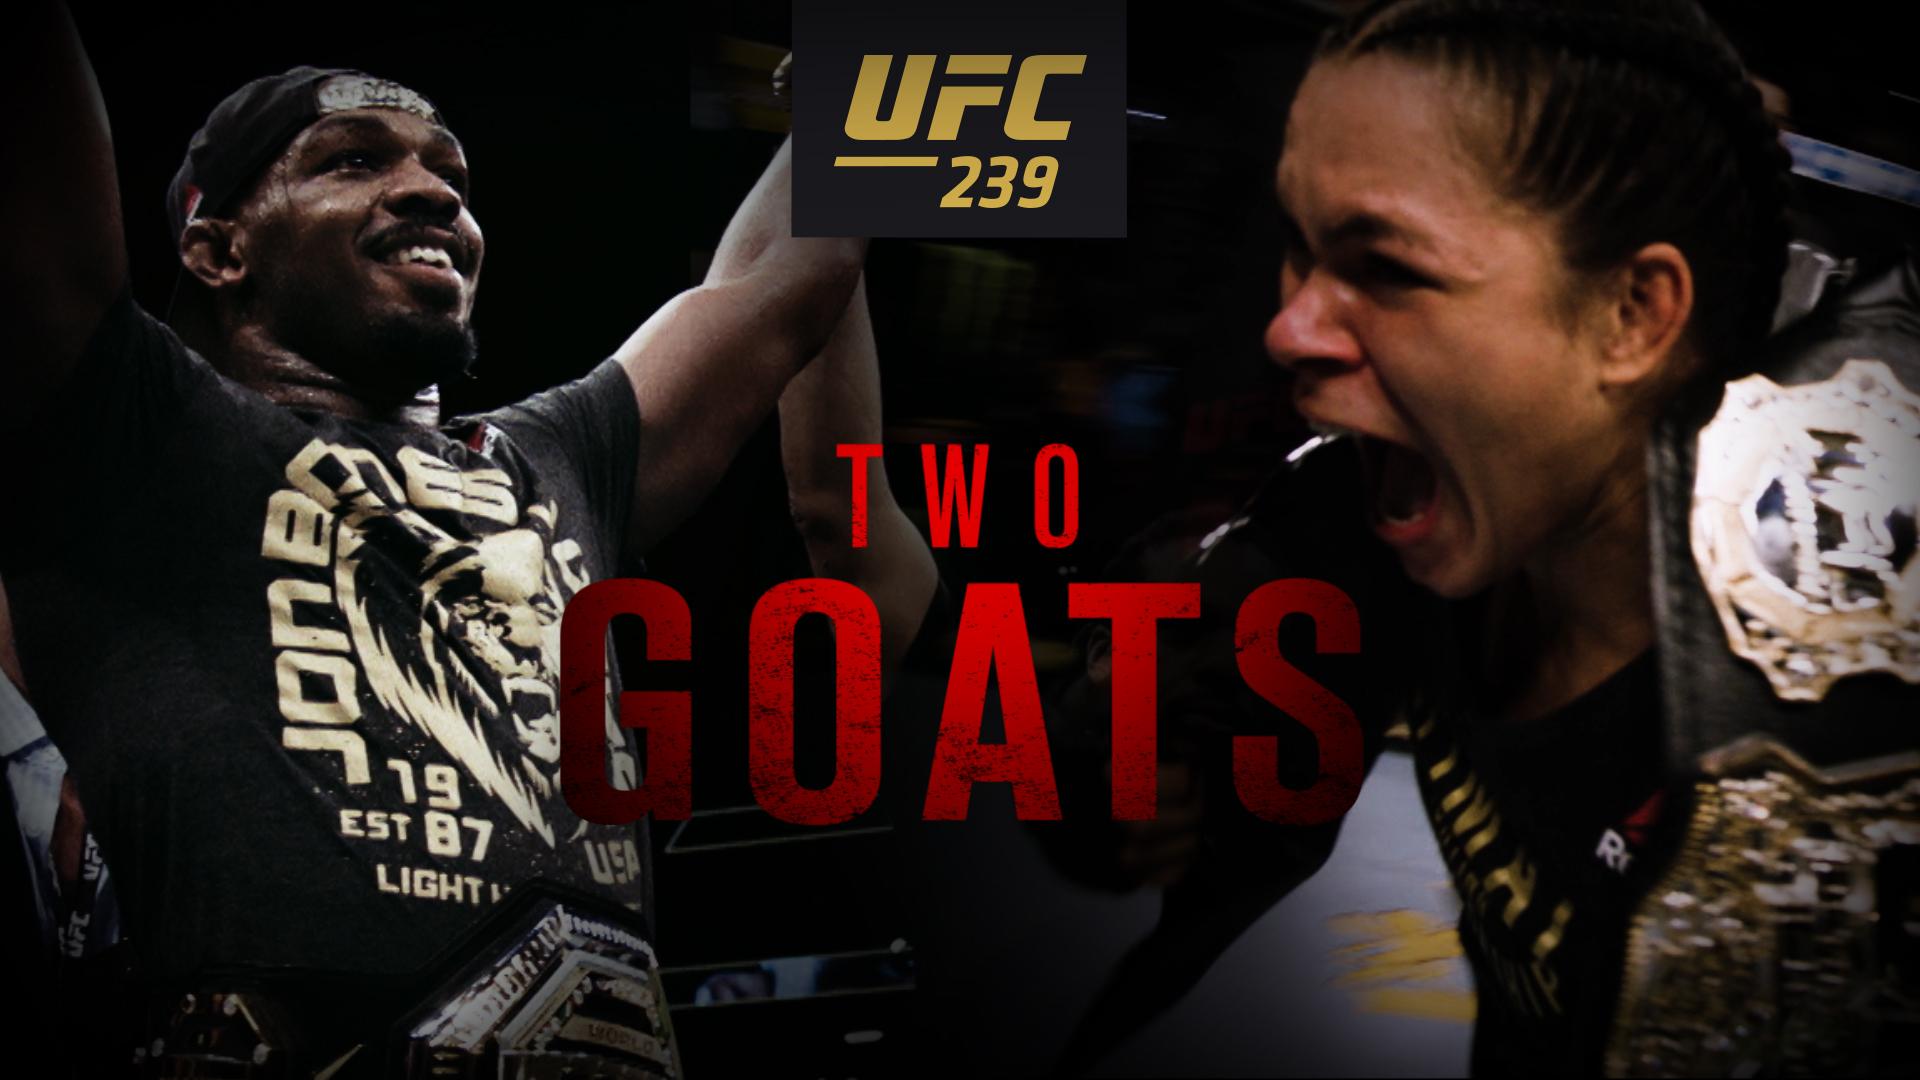 UFC 239: Two G.O.A.T.s